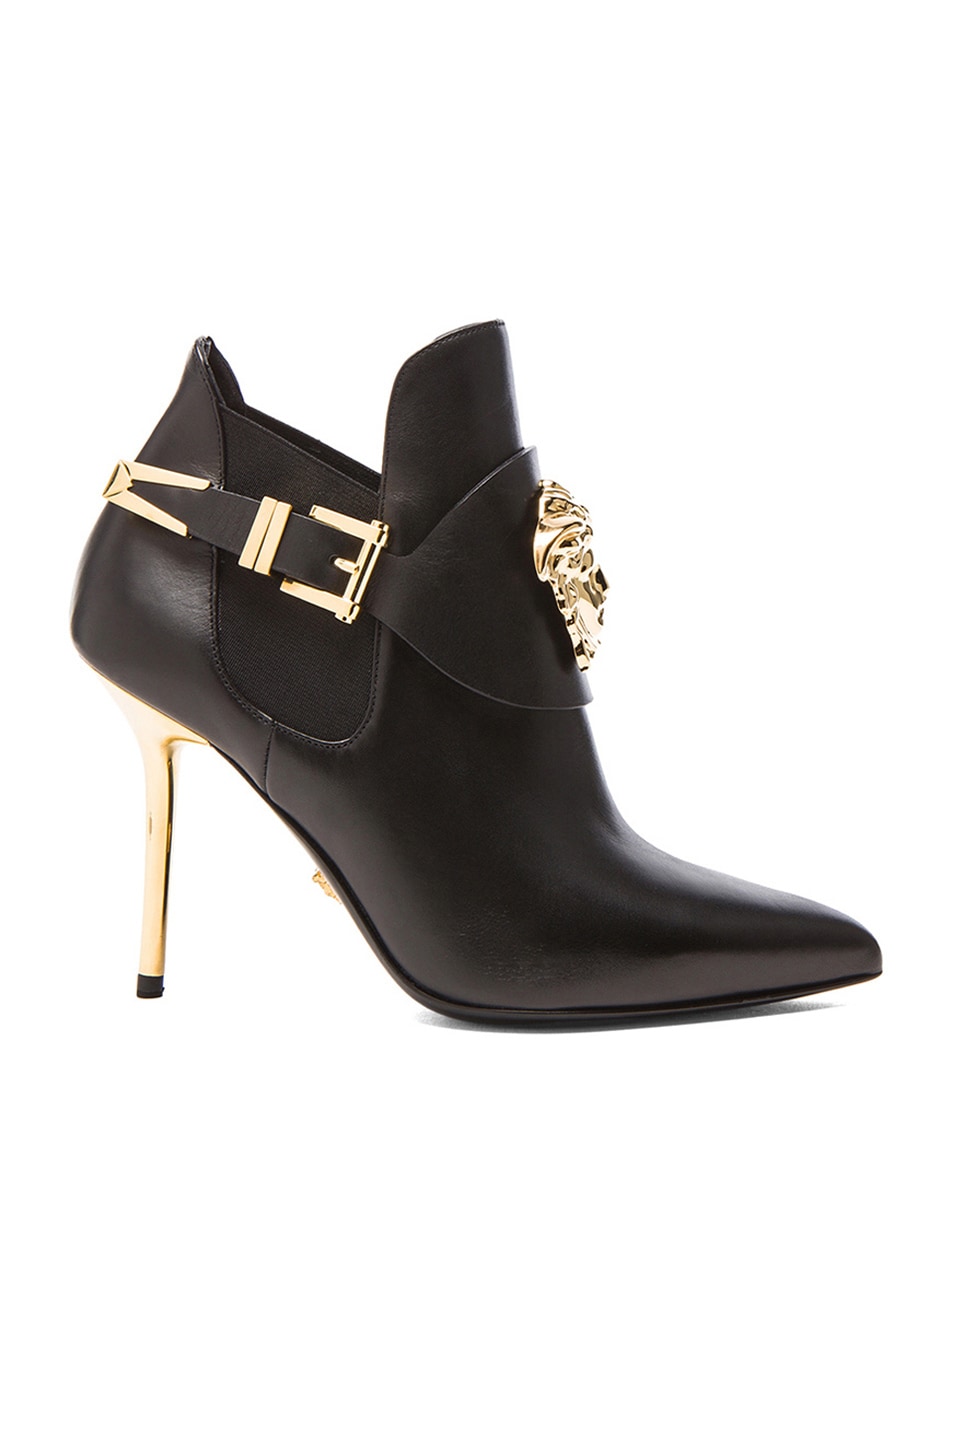 Image 1 of VERSACE Medusa Head Leather Booties in Black & Gold